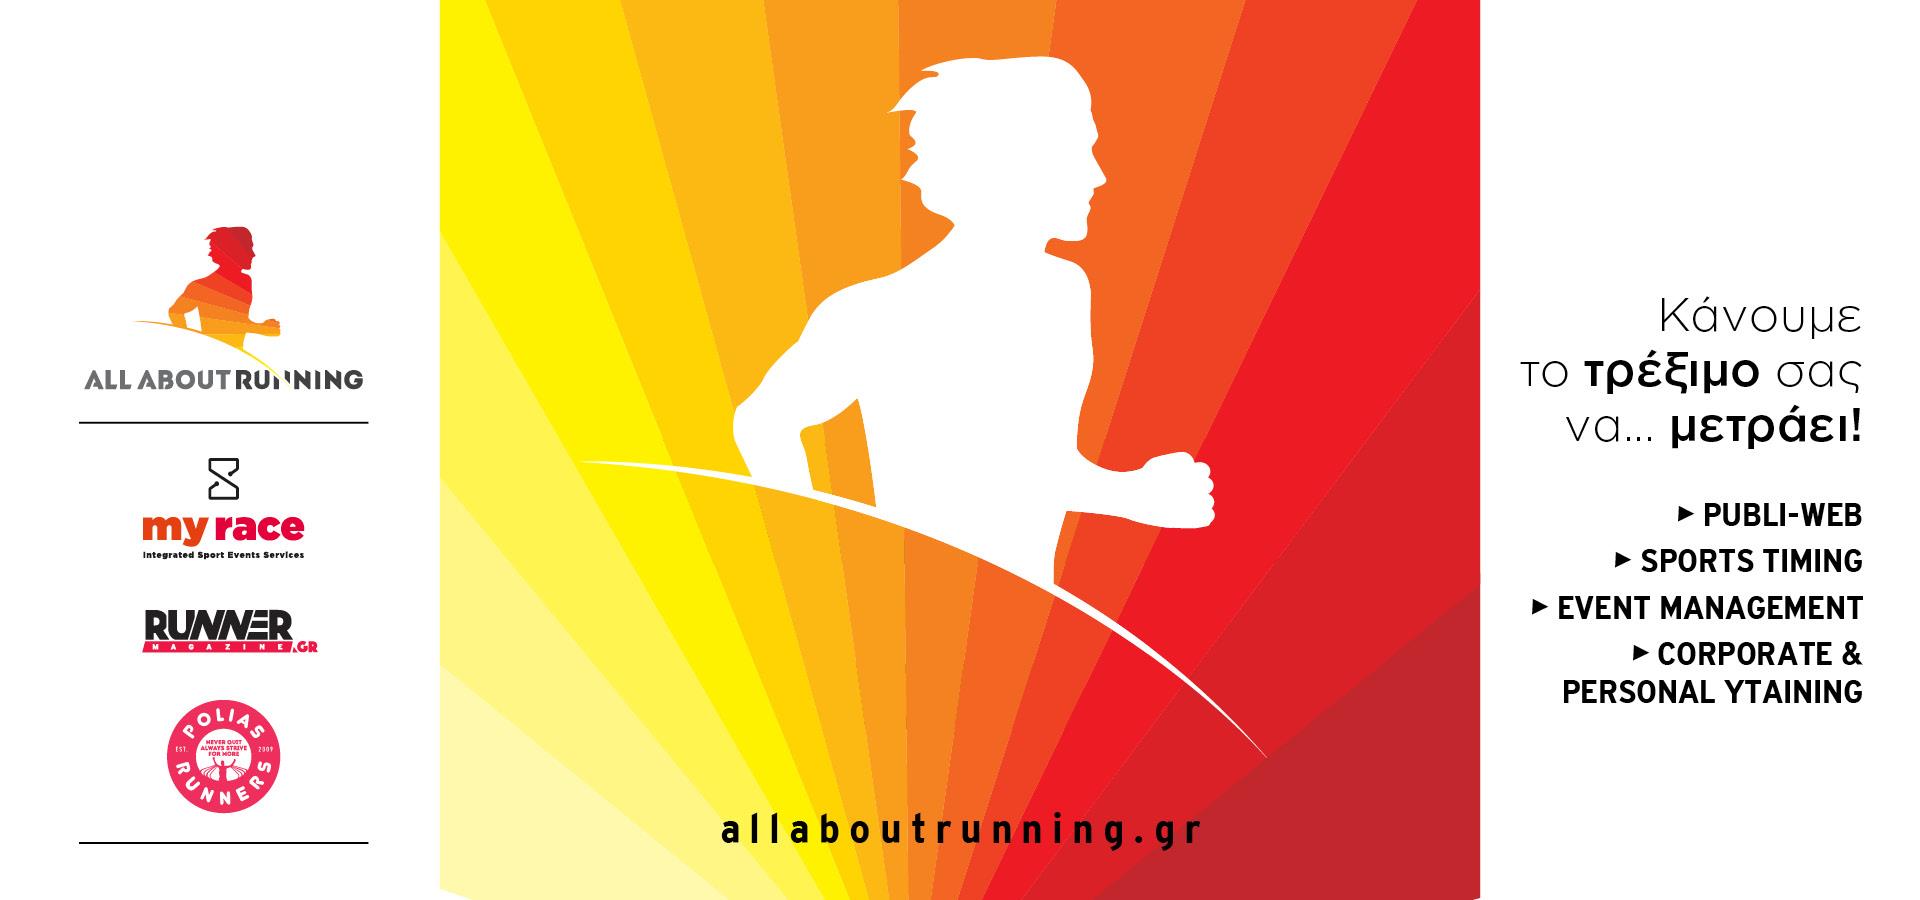 ALL ABOUT RUNNING